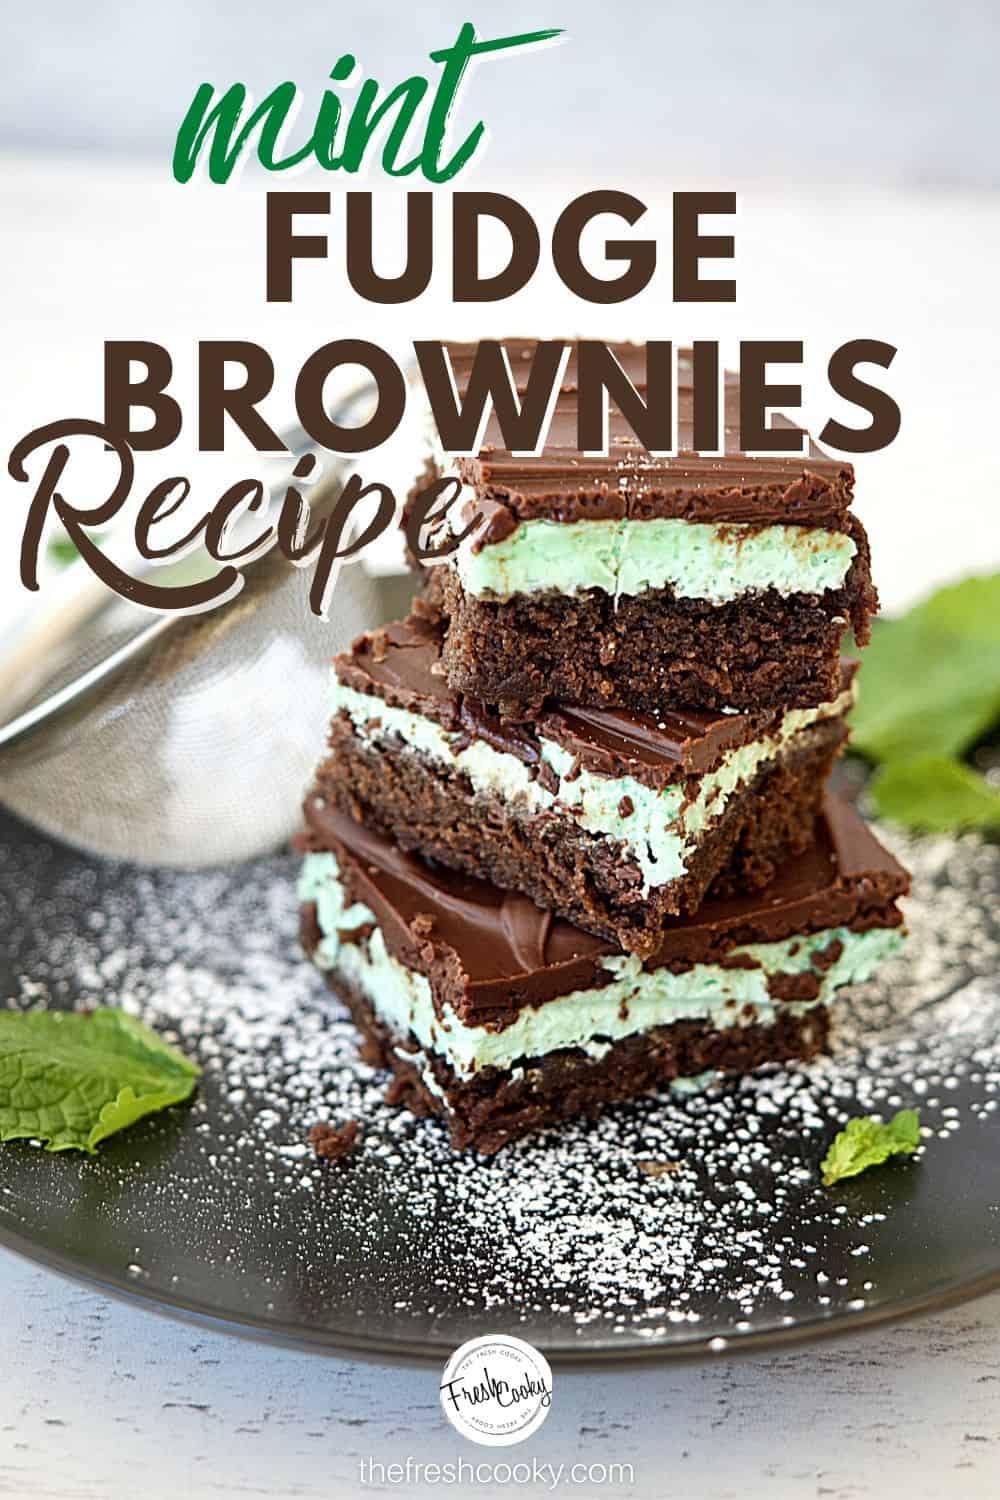 Pinterest Image for Mint Fudge Brownie recipe with three stacked fudge layered brownies on a black plate with powdered sugar sprinkled and mint leaves on plate.